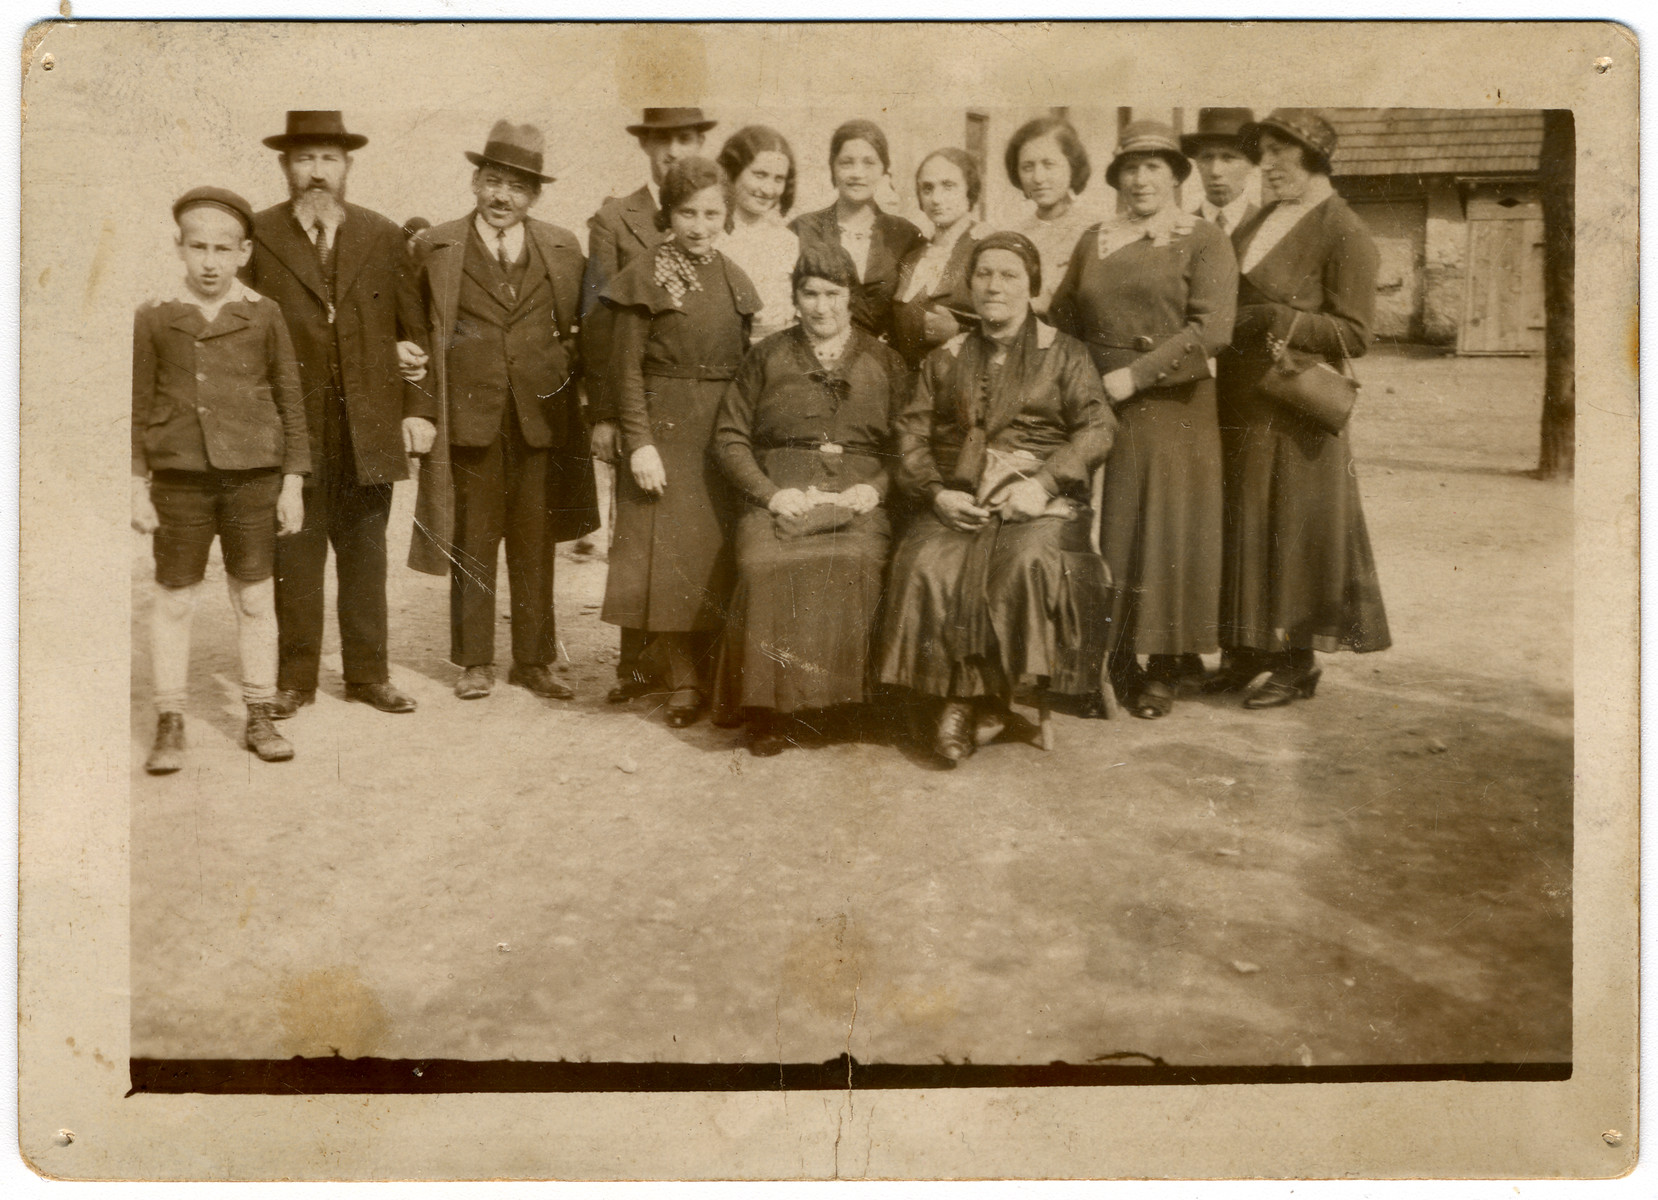 A large Orthodox family gathers together on the Jewish holiday, Lag Ba'Omer.

Seated are: Sharika Frieder (wife of Pinchas Frieder), Mali Grunfeld (Malvina's mother).  Standing are: Walter Jungleib (son of Arye Jungleib and Malvin Frieder, daughter of Pinchas Frieder), Pinchas (Philip) Frieder (cantor and shochet in Prievidze, CZ), Arye Jungleib, (boy in back) cousin to Rabbi Lebovich's daughters, (girl in front) girlfriend of Malvina's from Galanta, daughter of Rabbi Lebovich from Bratislava, ?  Fruchter (sister-in-law to Malvina's sister, Zali), daughter of Rabbi Lebovich from Bratislava, Helen Weinstein (Malvina's sister), Avraham (Rumi) Grunfeld (Malvina's brother, Lenke Grunfeld (Malvina's sister)